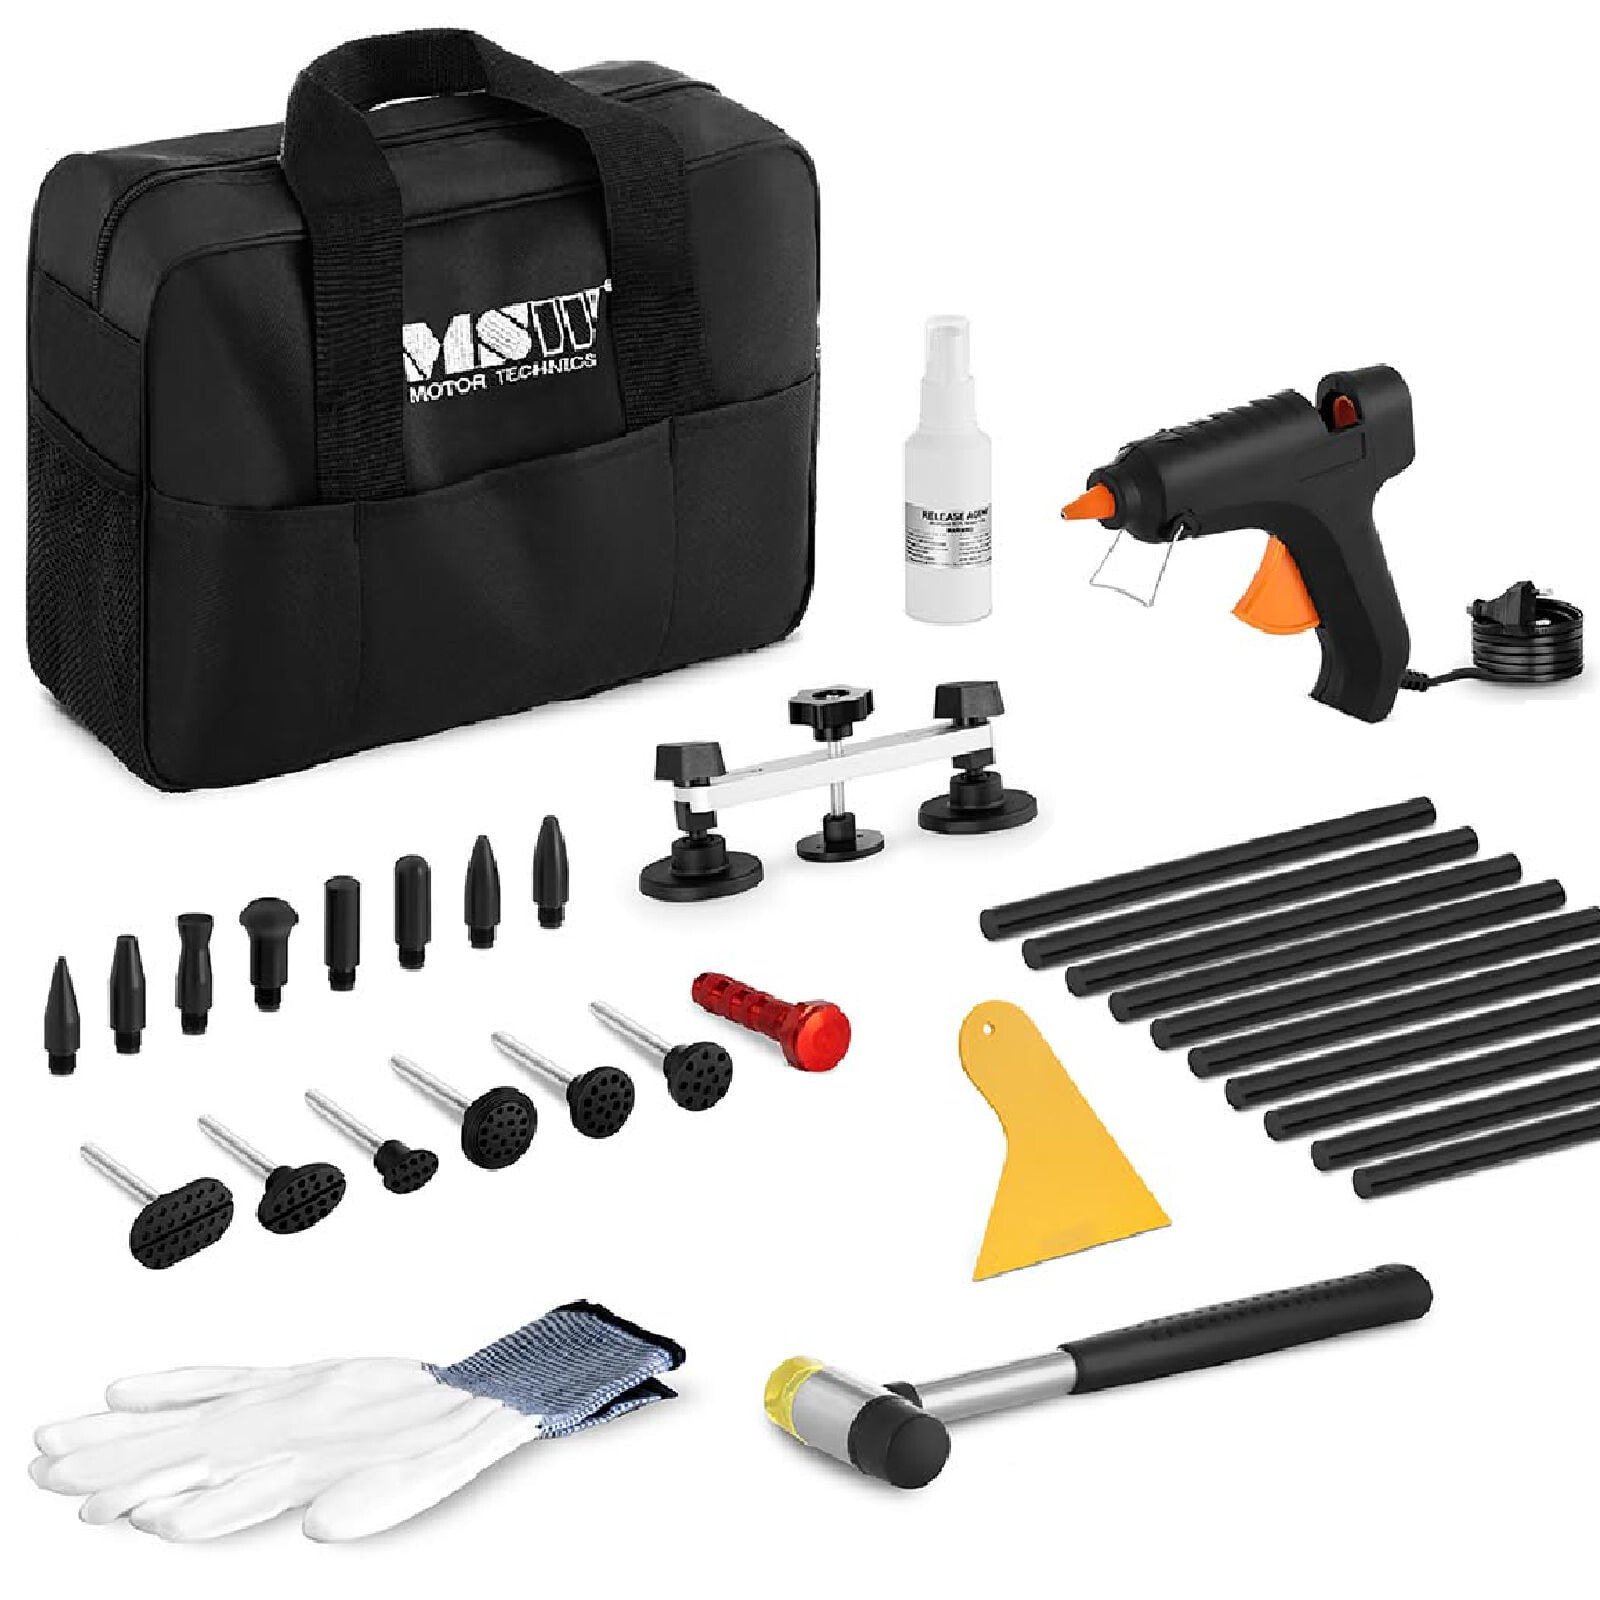 PDR repair kit for removing dents in the car body - 8 adapters